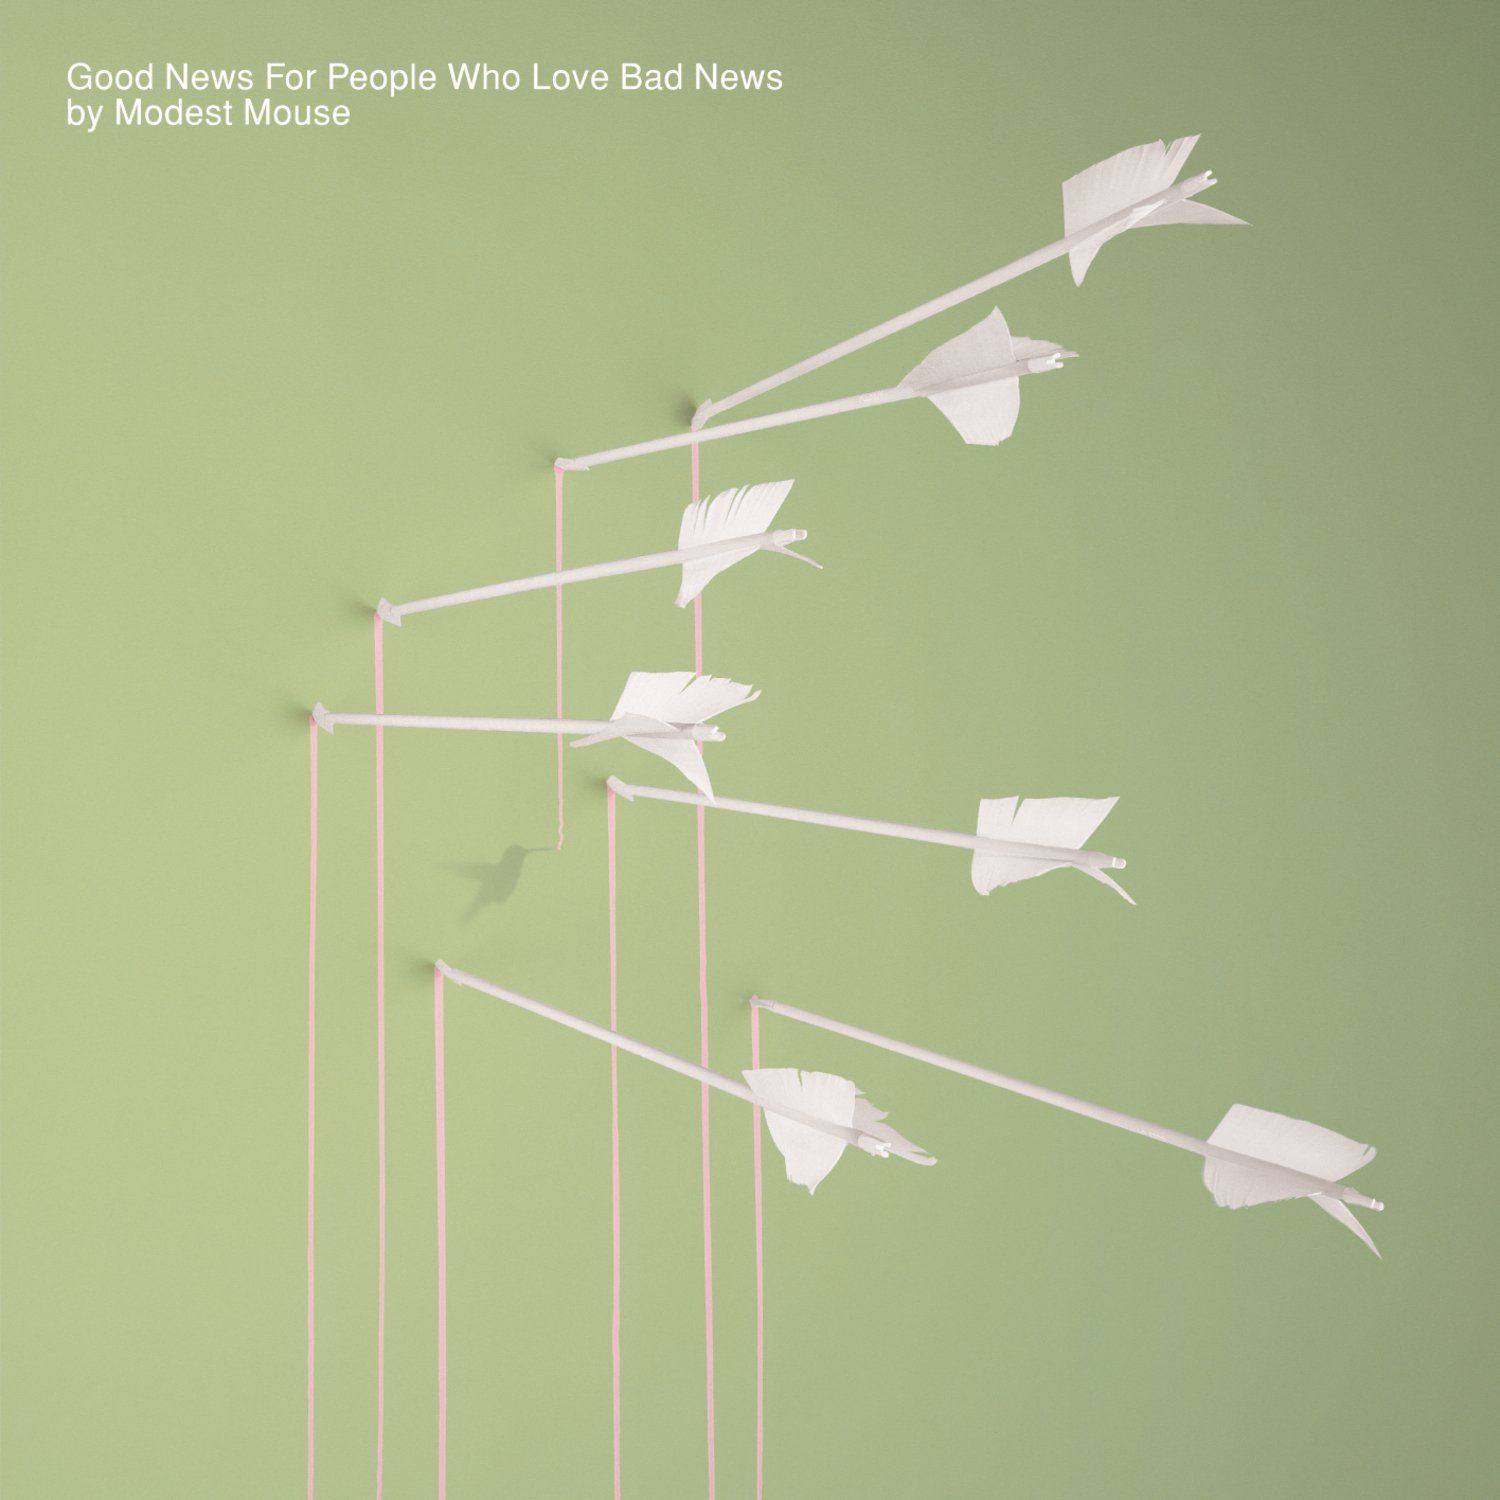 Modest Mouse’s ‘Good News For People Who Love Bad News’ turns 15